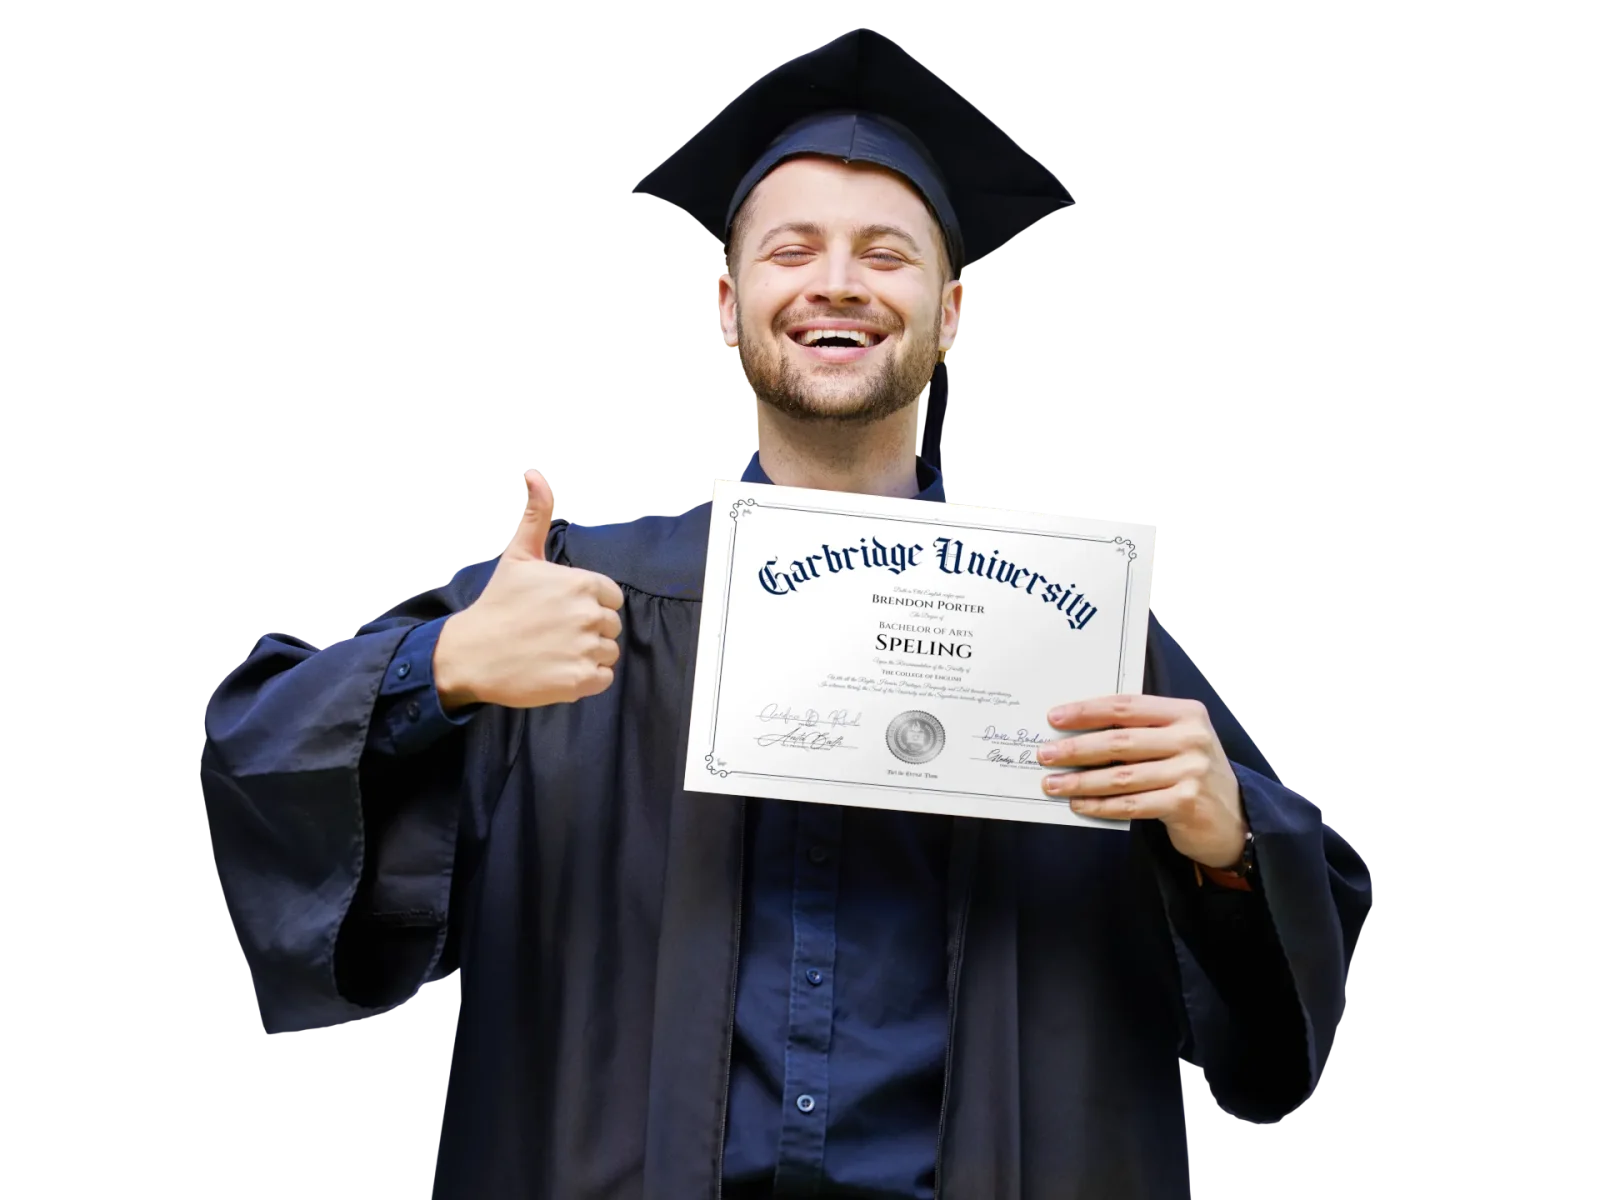 A man dressed in graduate clothing holding a degree.